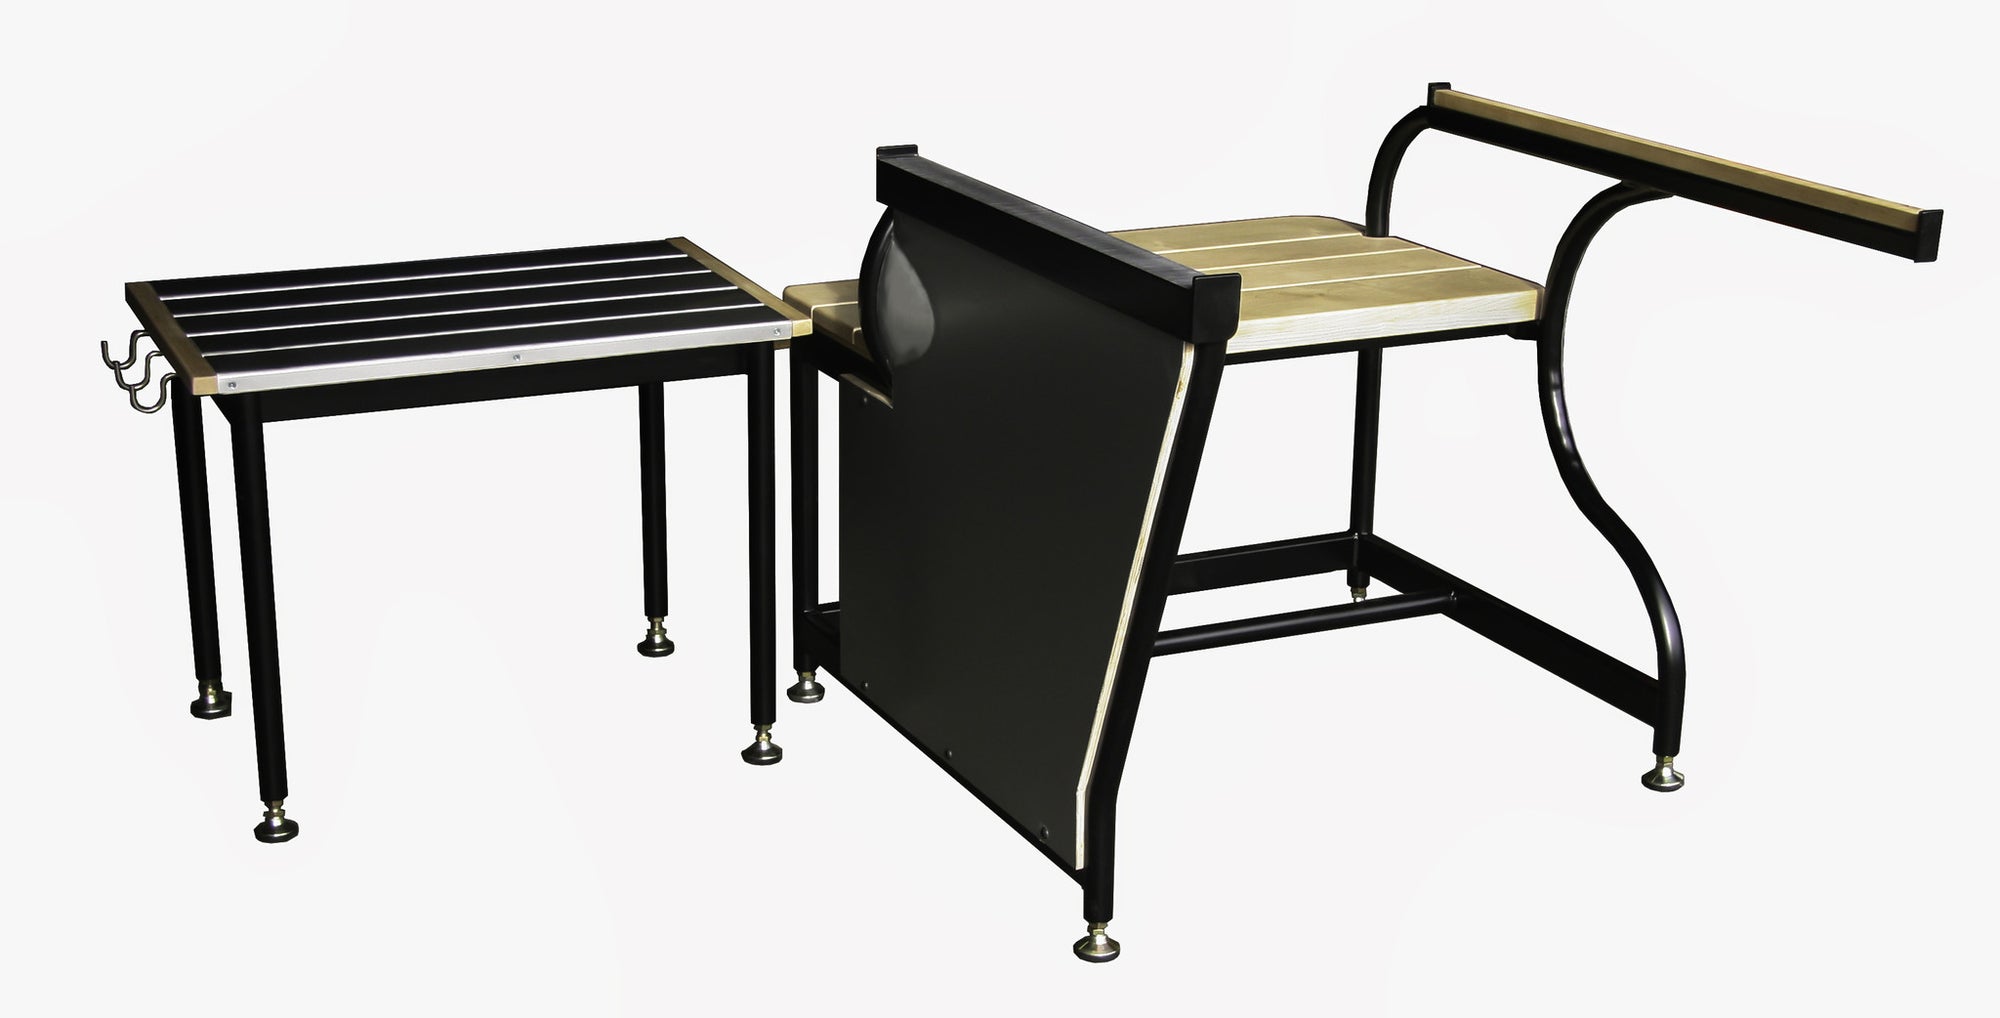 Traditional bench and separate side table for hot glass working, featuring black powder coated steel  construction, with maple accents.